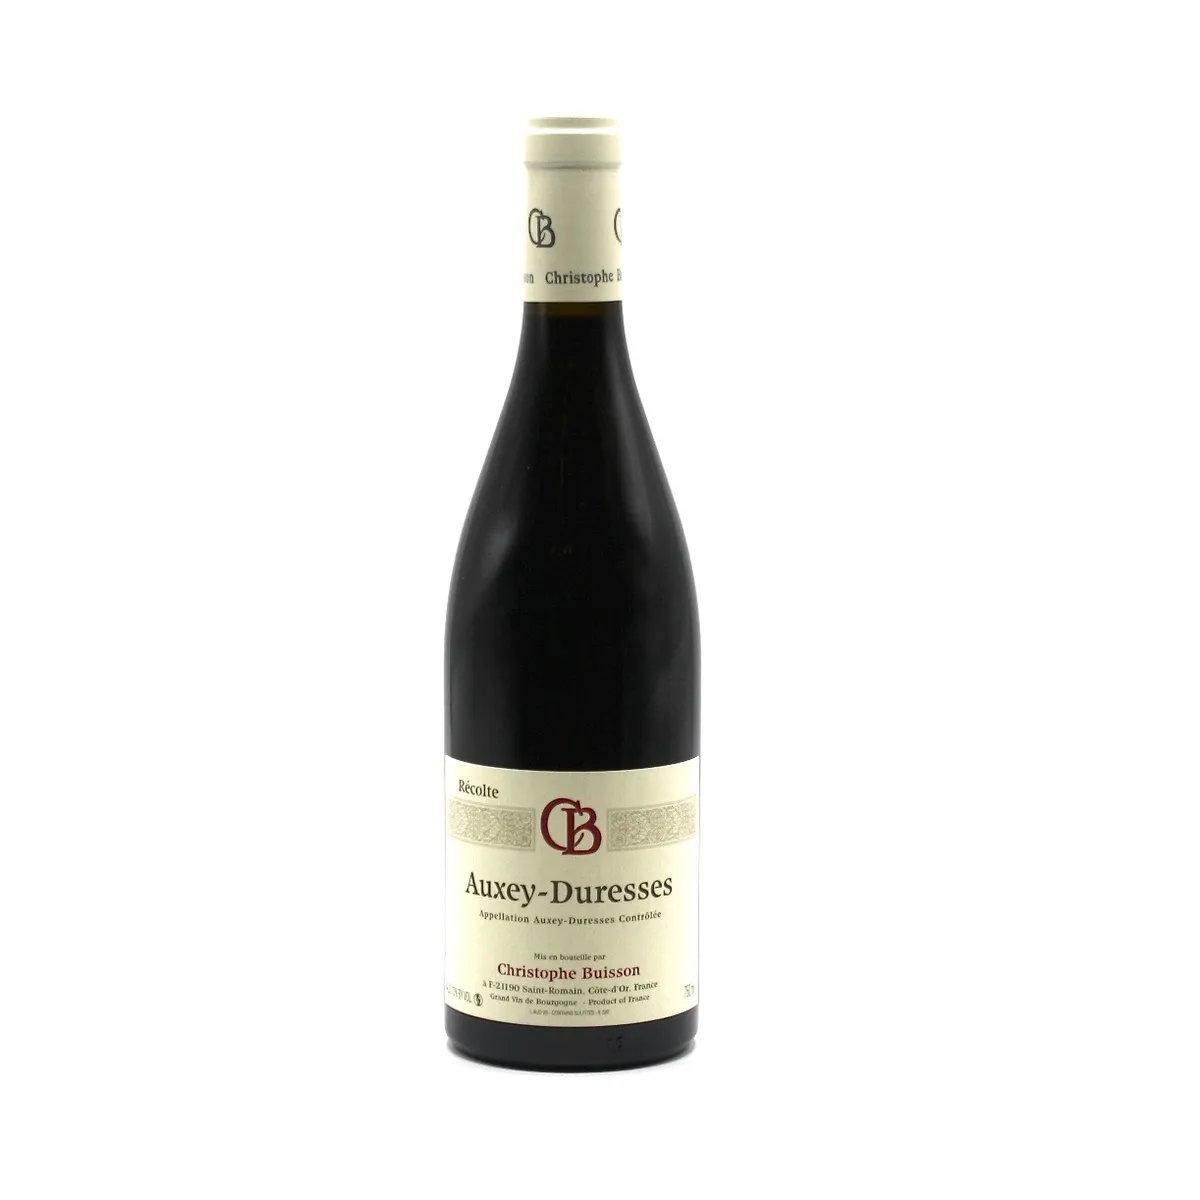 AUXEY-DURESSES ROUGE 2020 CHRISTOPHE BUISSON 75CL